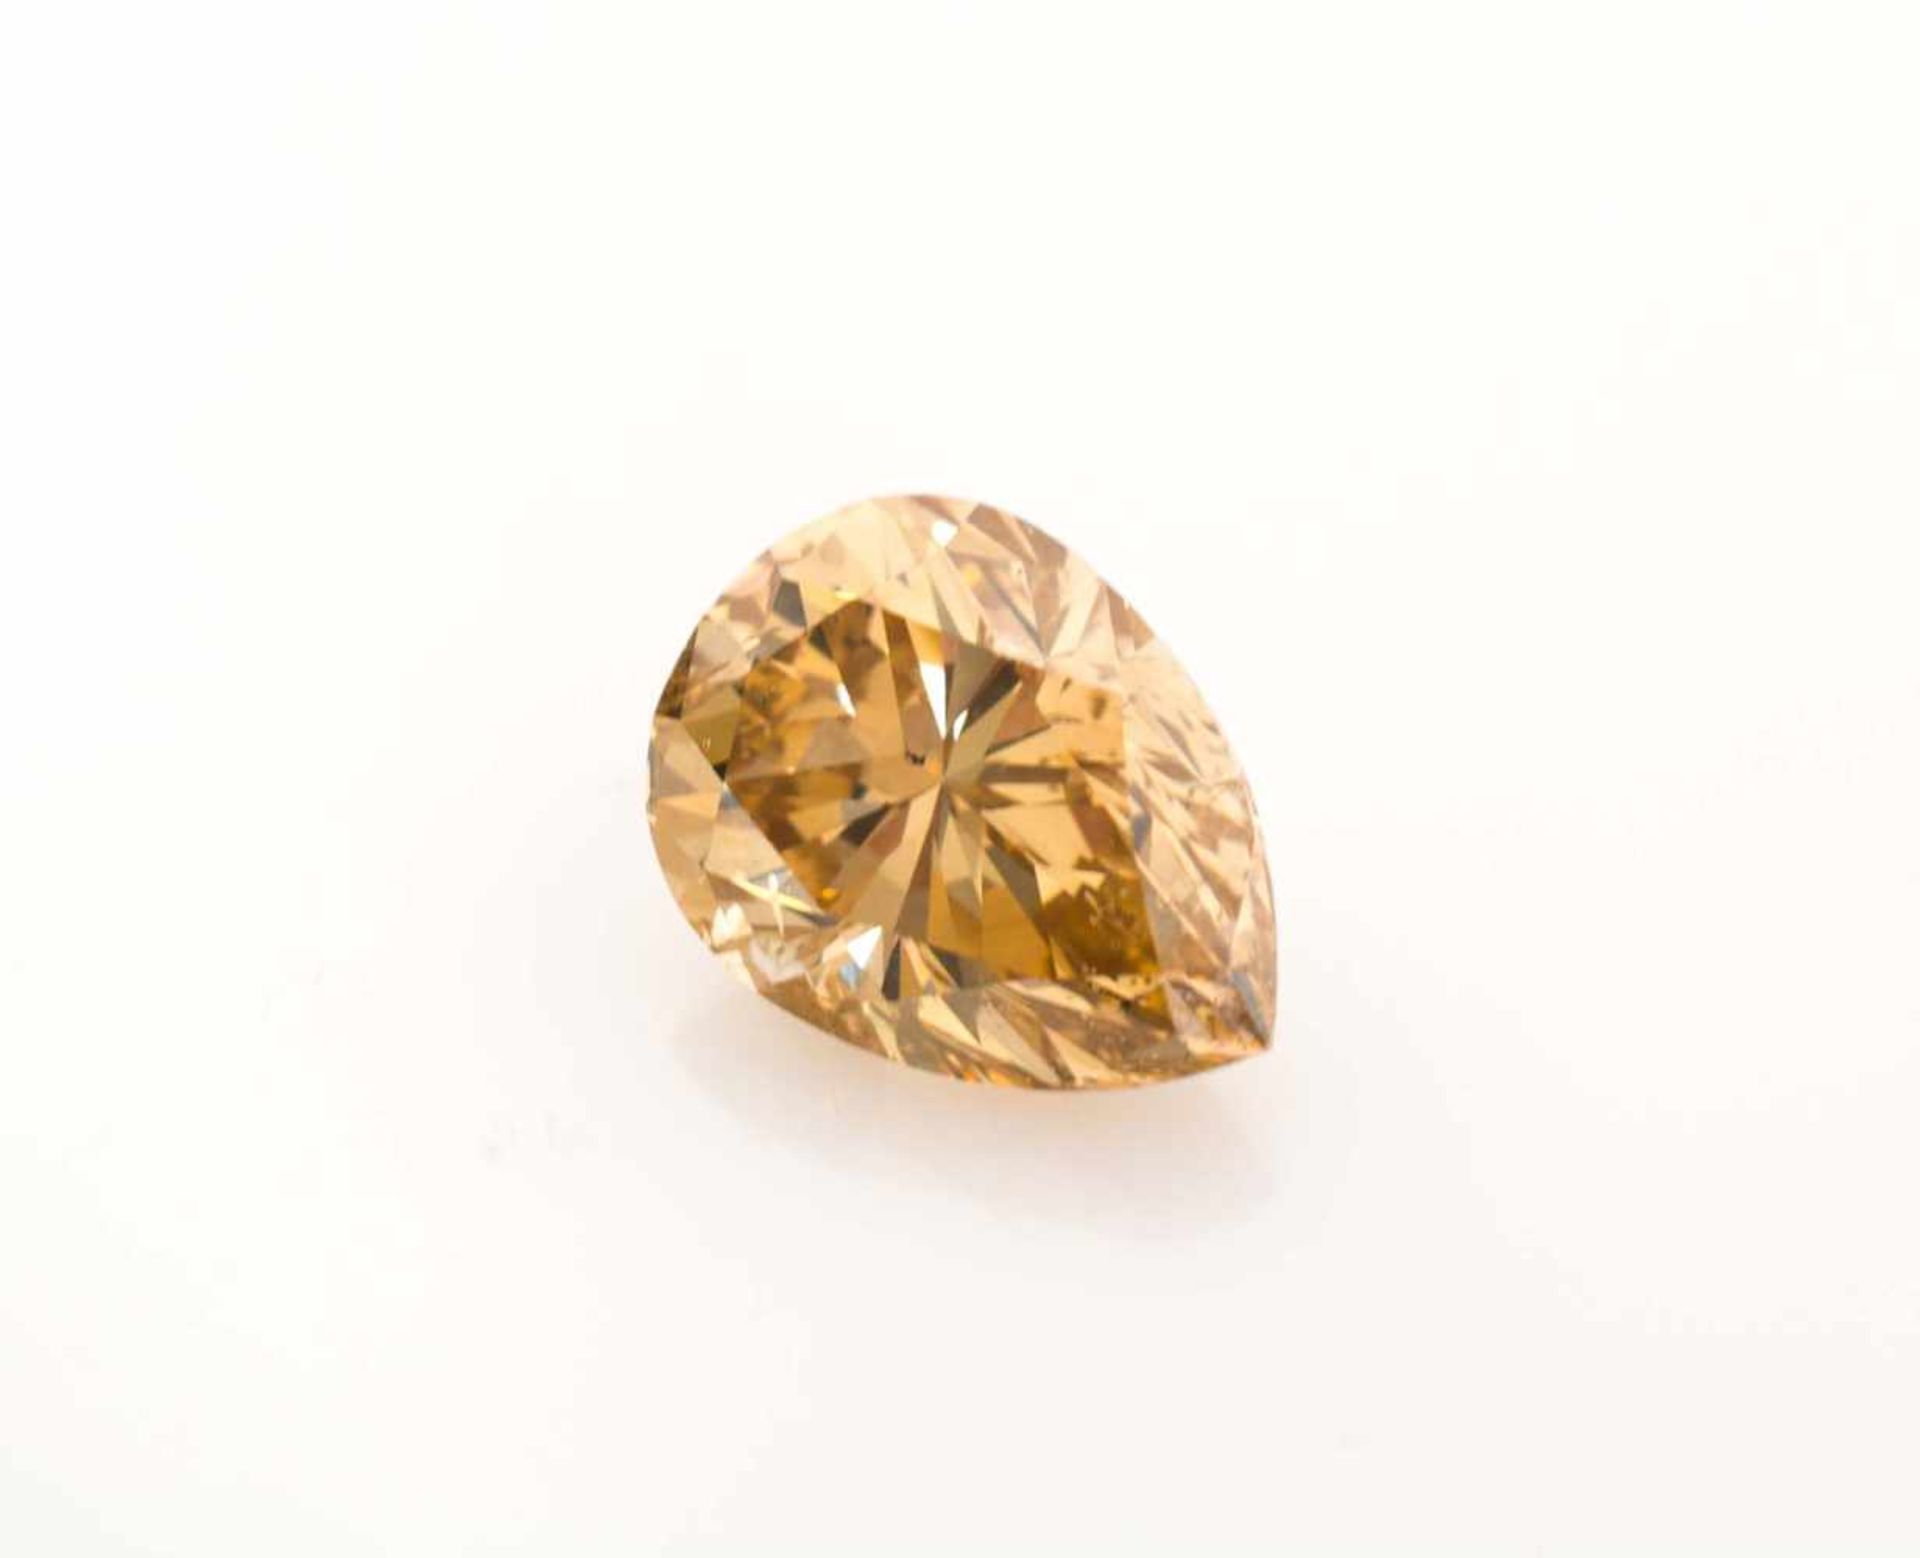 Diamant im Pear-Cut 10,40 ct, si2/fancy intense yellowisch brown, natural color, Proportionen gut,